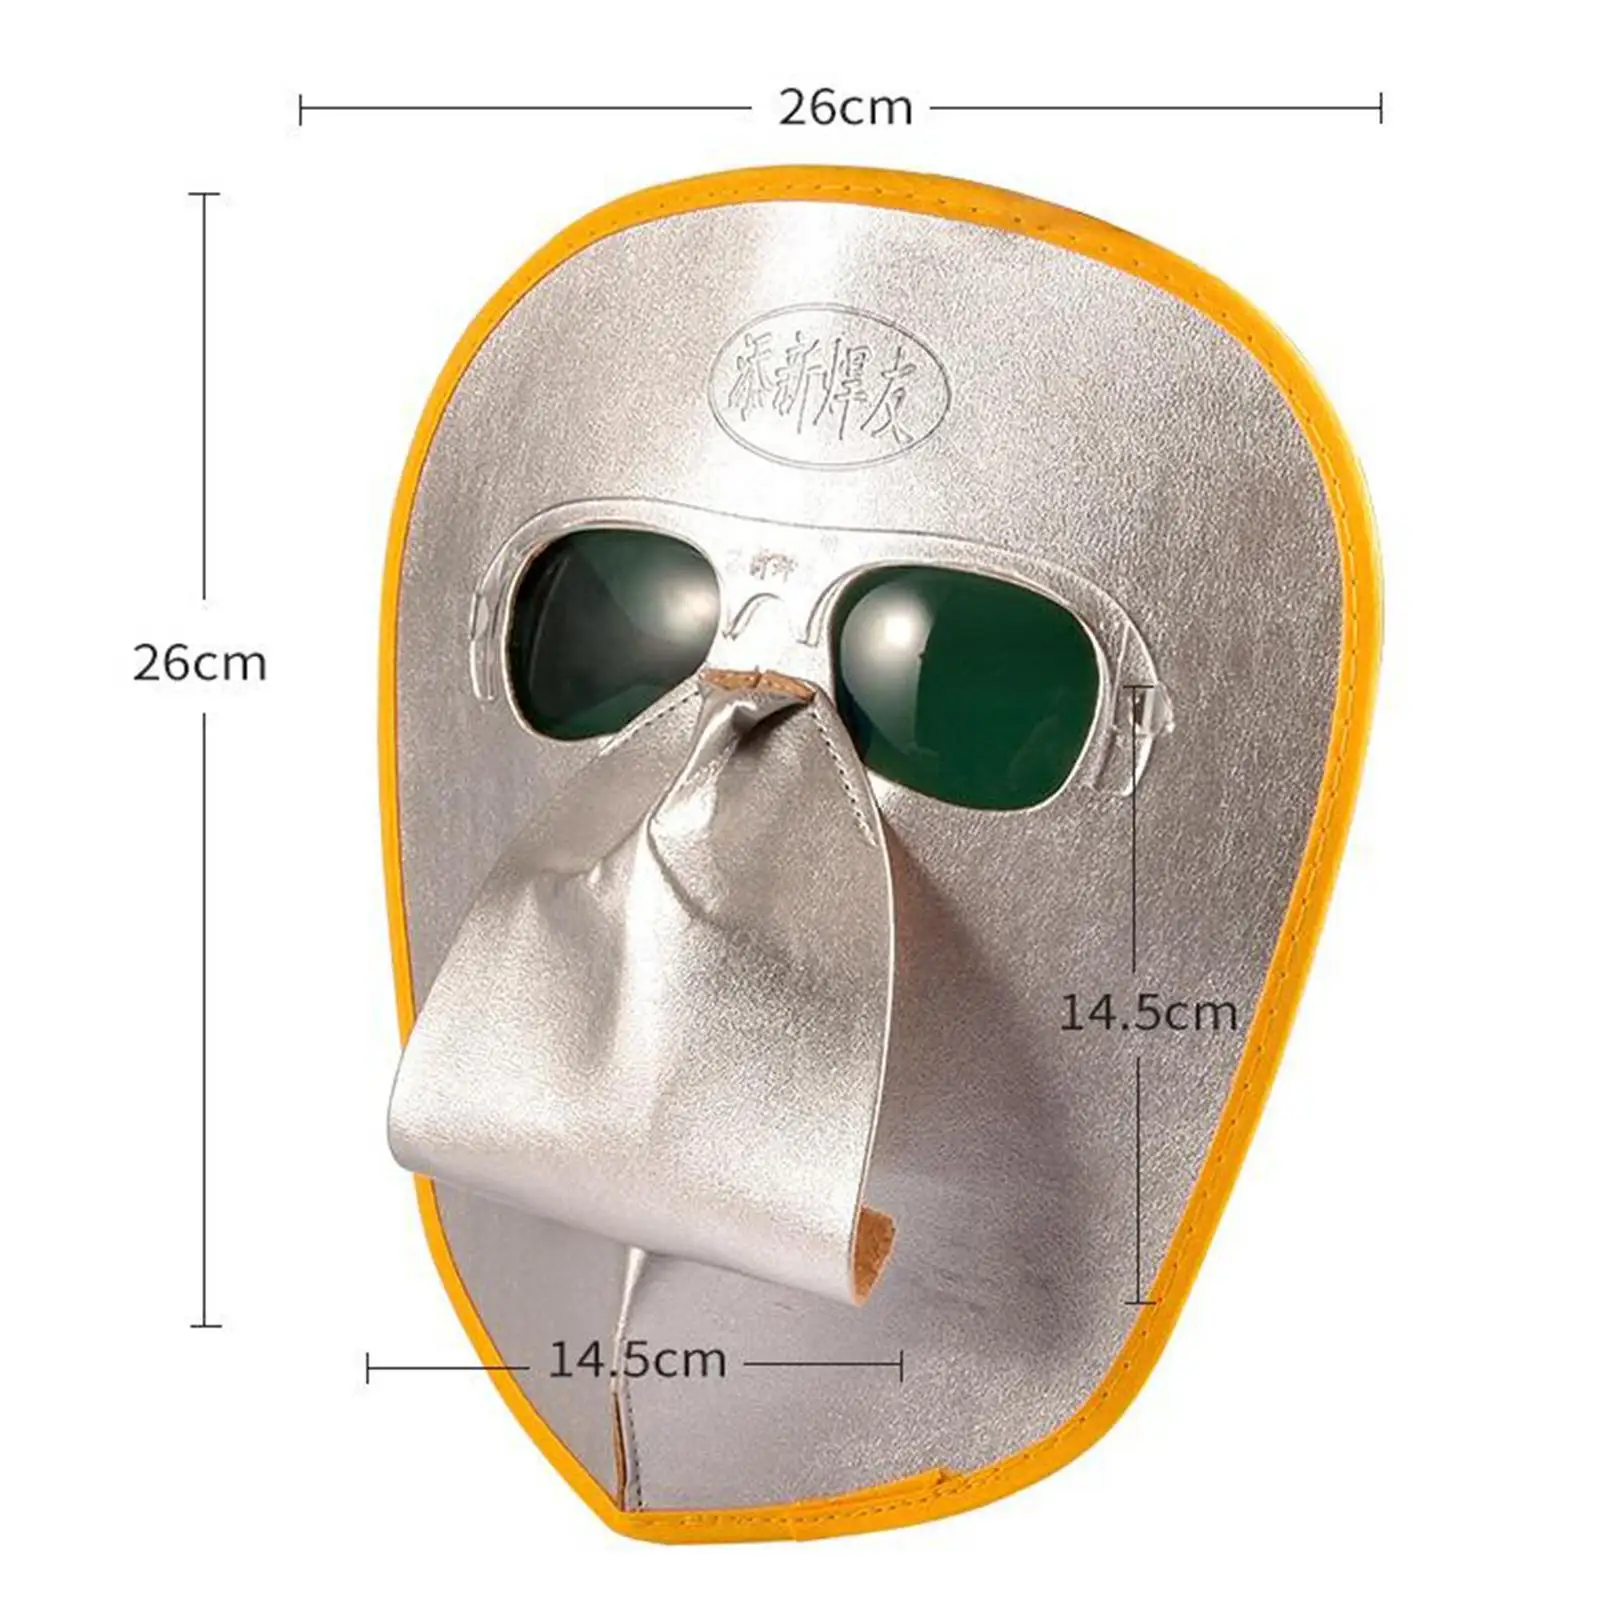 Welding Face Protection Set Heat Insulation Leather Welding Mask and Welding Goggles for Metal Casting Cutting Welding Workers